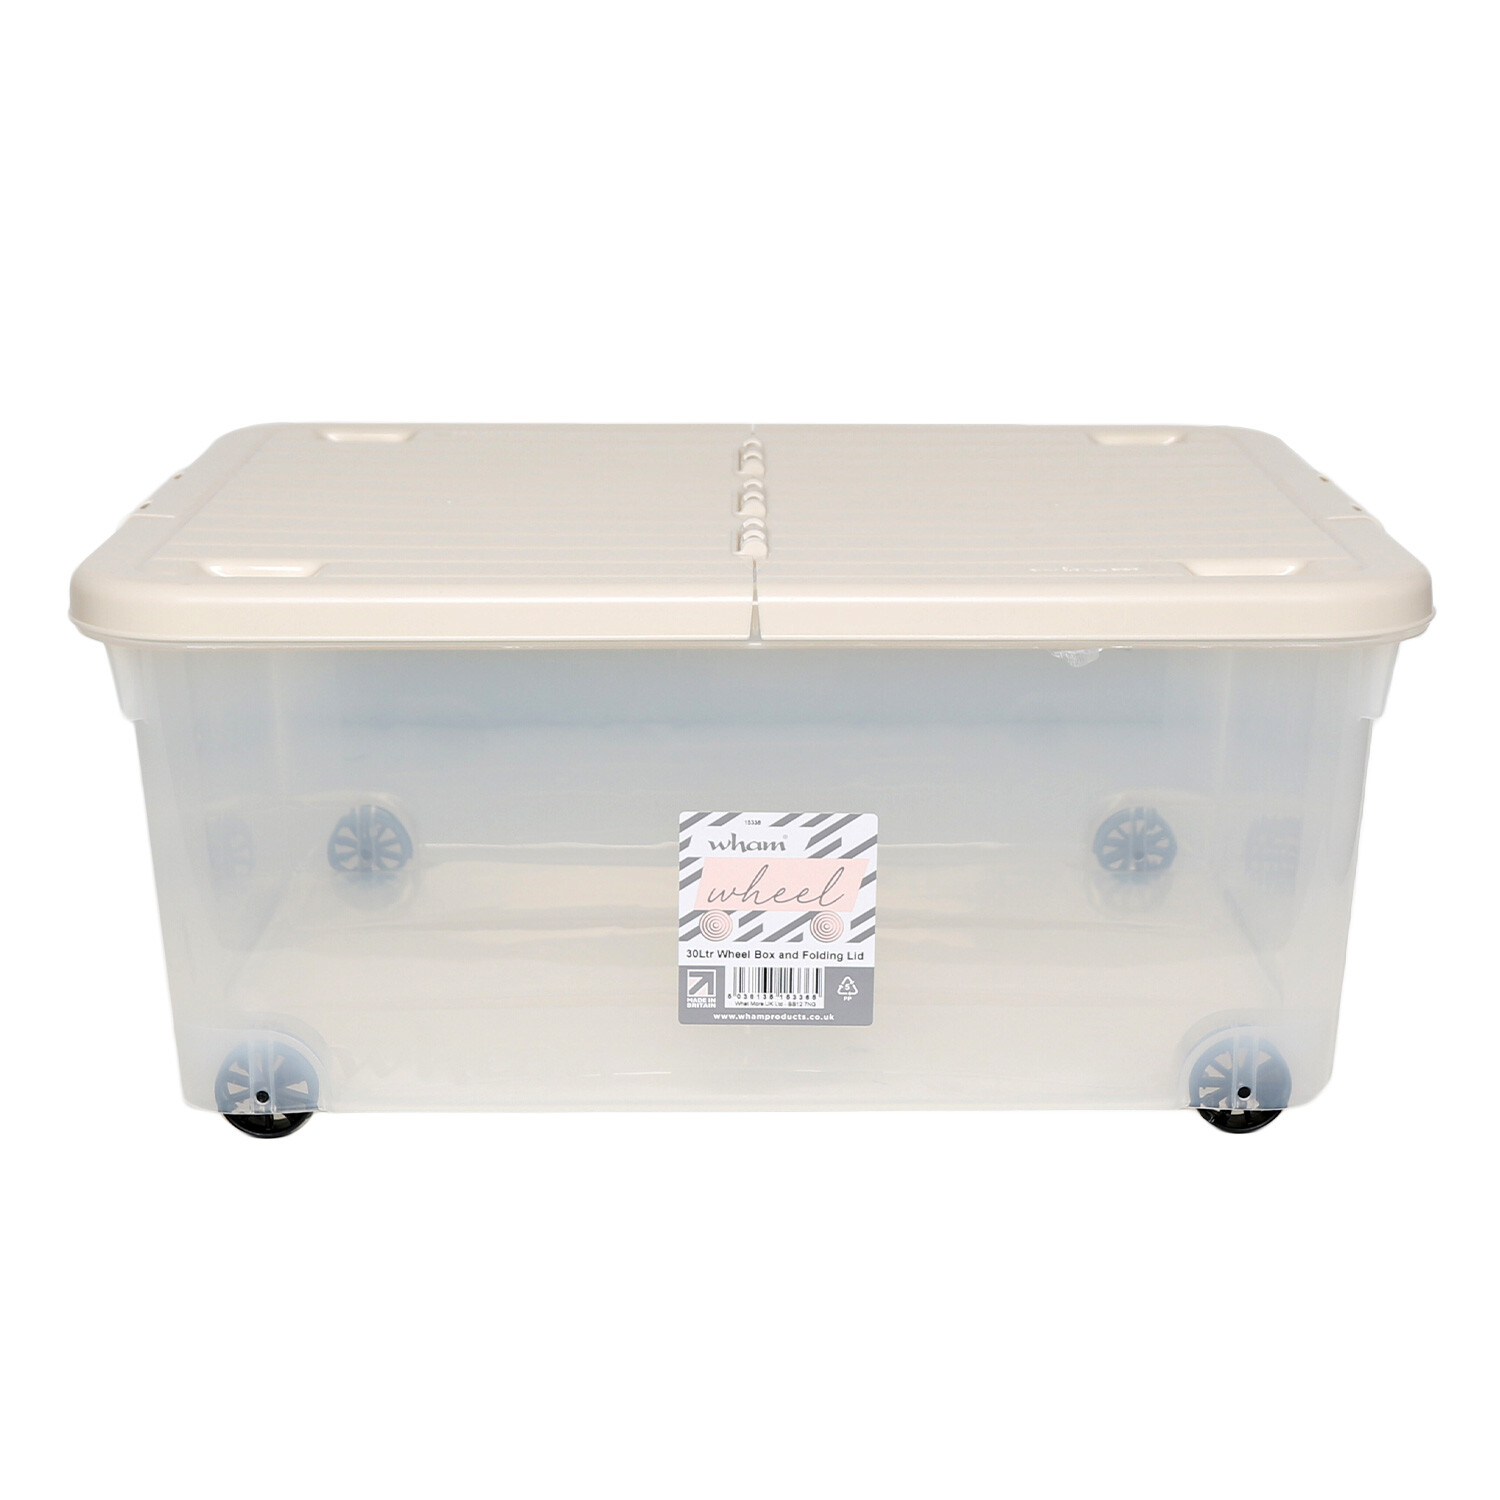 Wham Wheel Perfectly Pale Storage Box and Folding Lid 30L Image 3